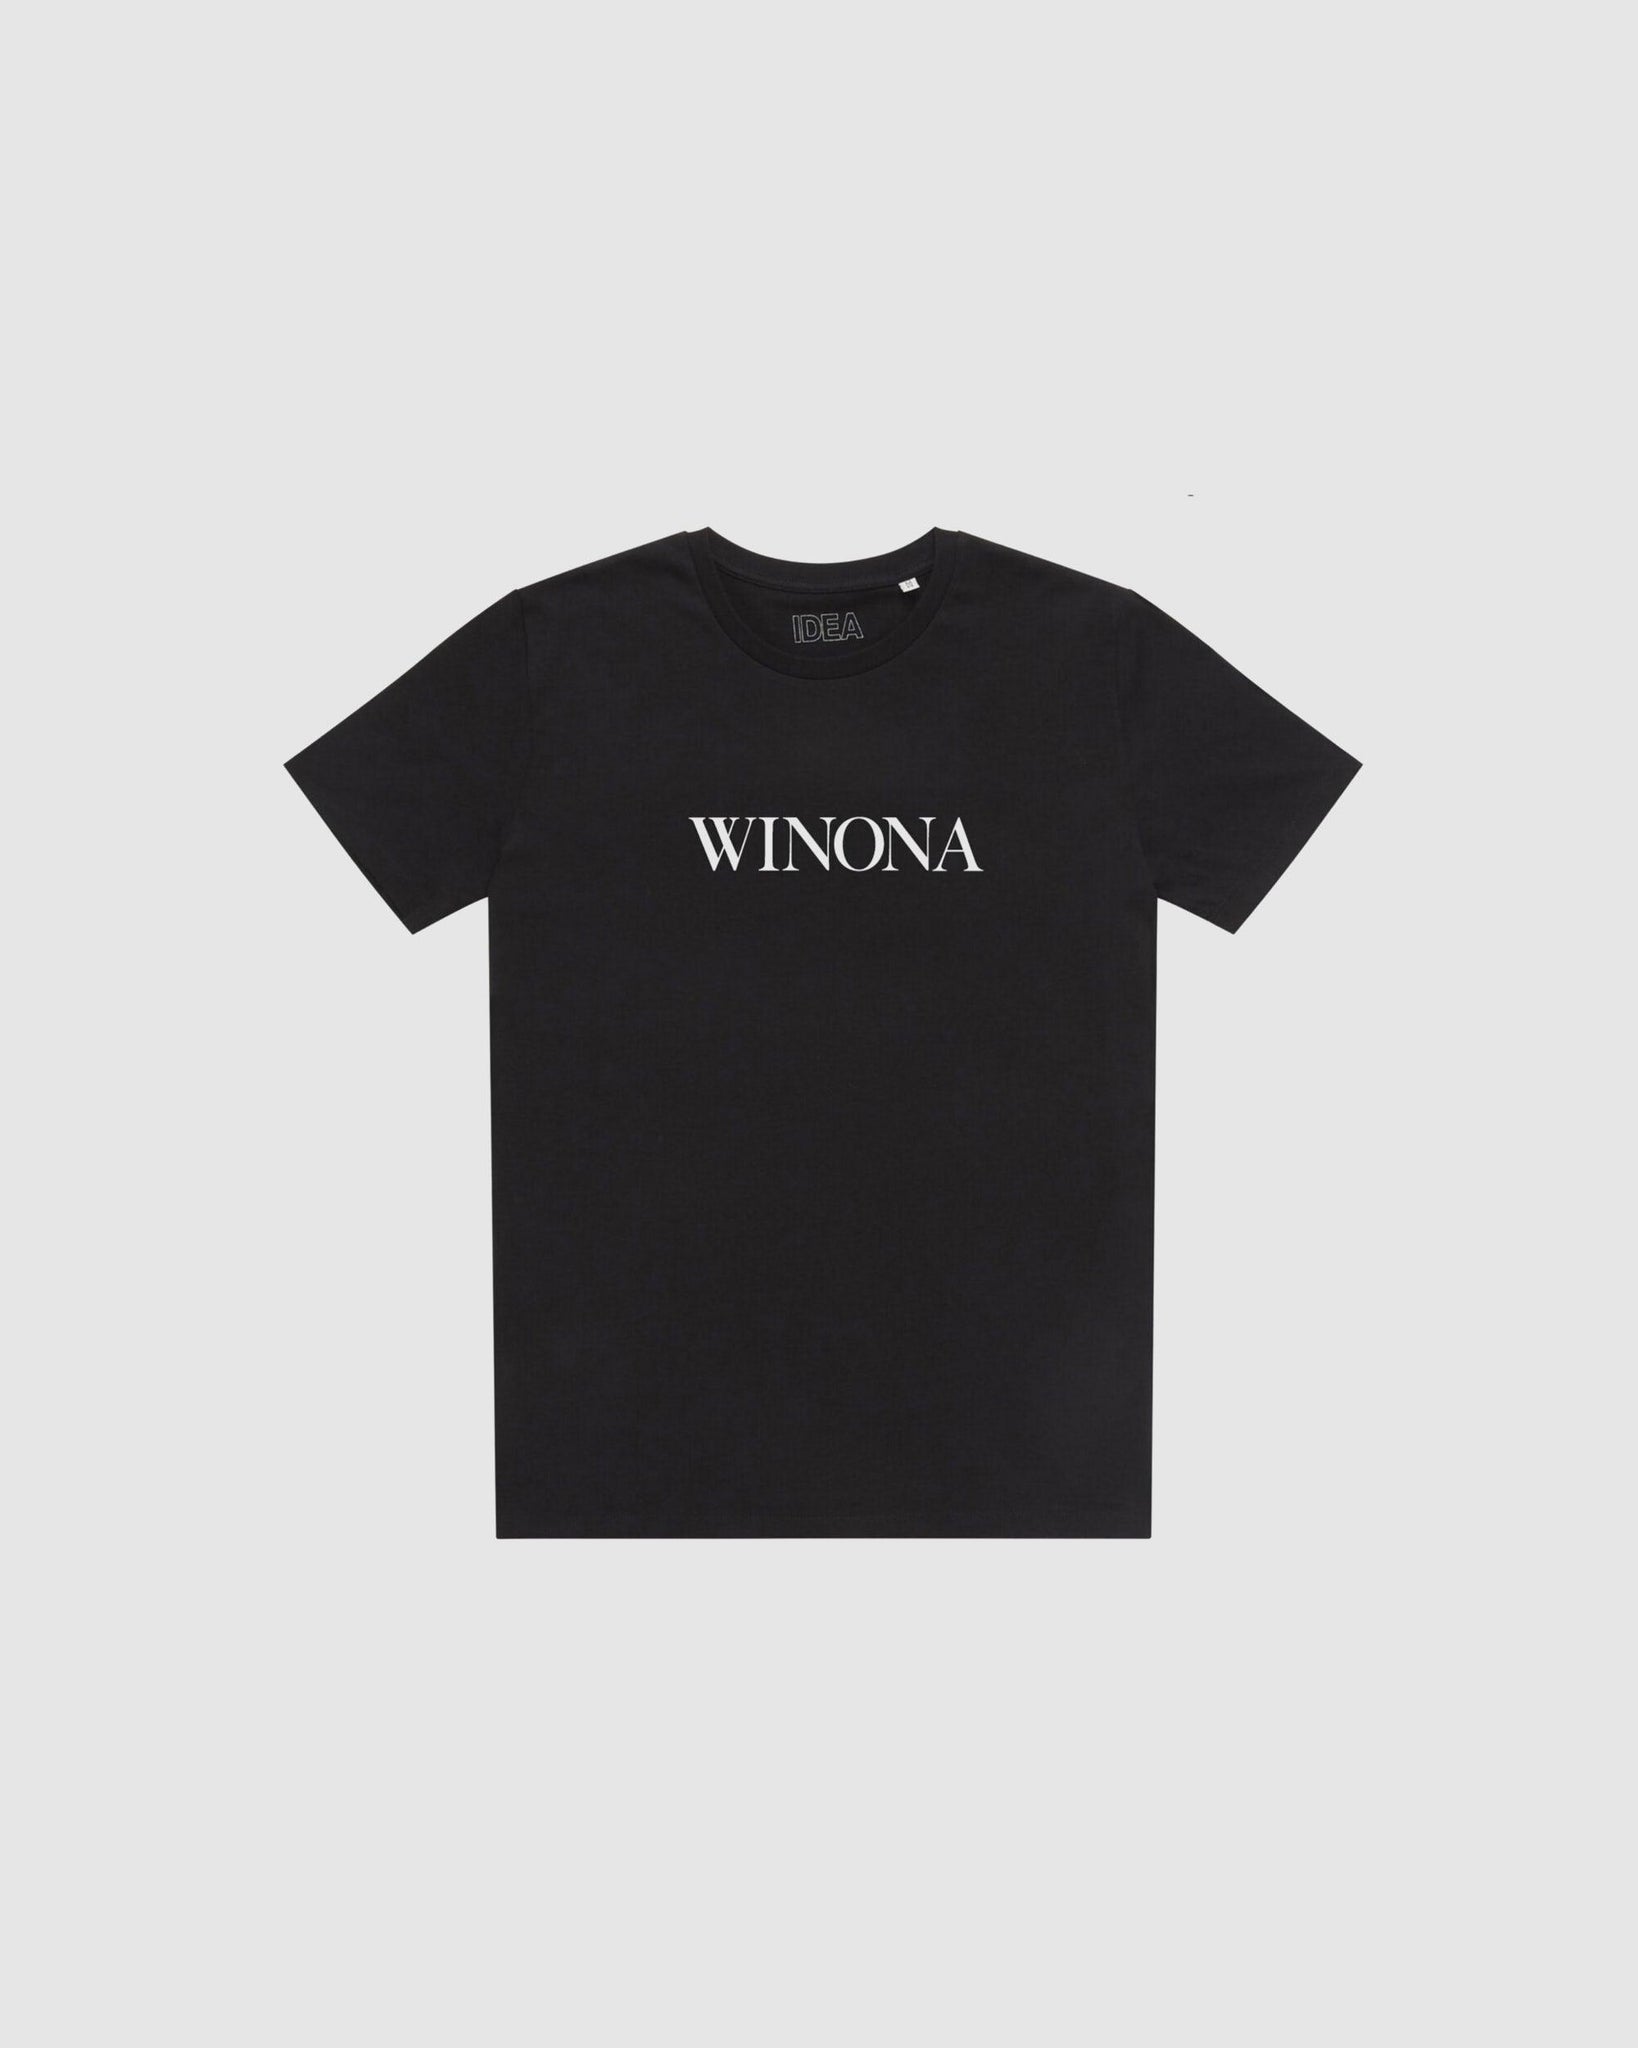 Winona T-Shirt Black - {{ collection.title }} - Chinatown Country Club 